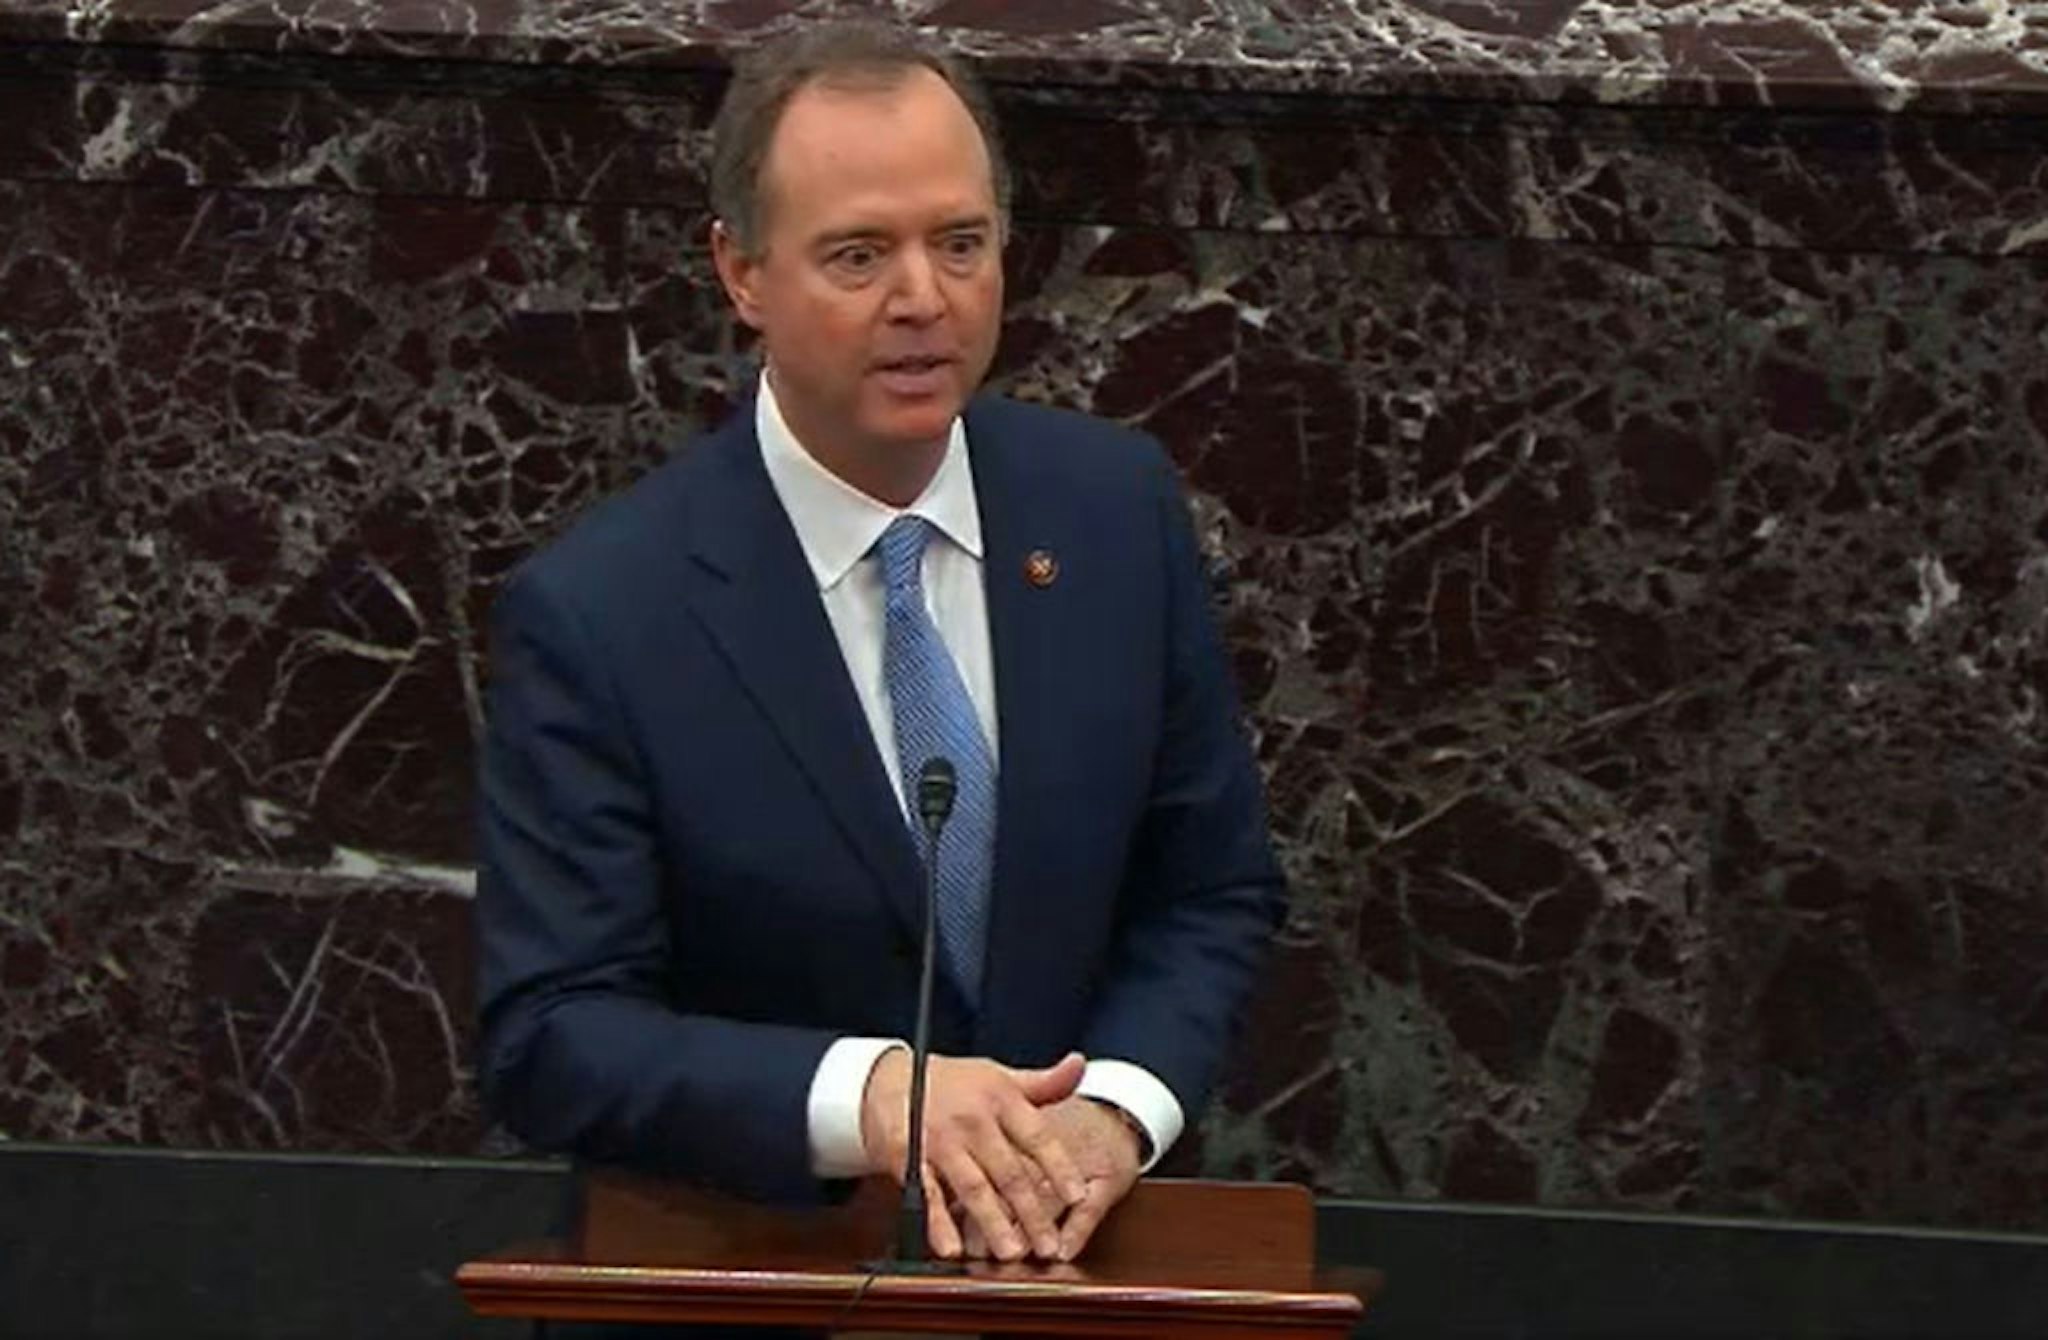 In this screengrab taken from a Senate Television webcast, House impeachment manager Rep. Adam Schiff (D-CA) speaks during impeachment proceedings against U.S. President Donald Trump in the Senate at the U.S. Capitol on January 24, 2020 in Washington, DC.